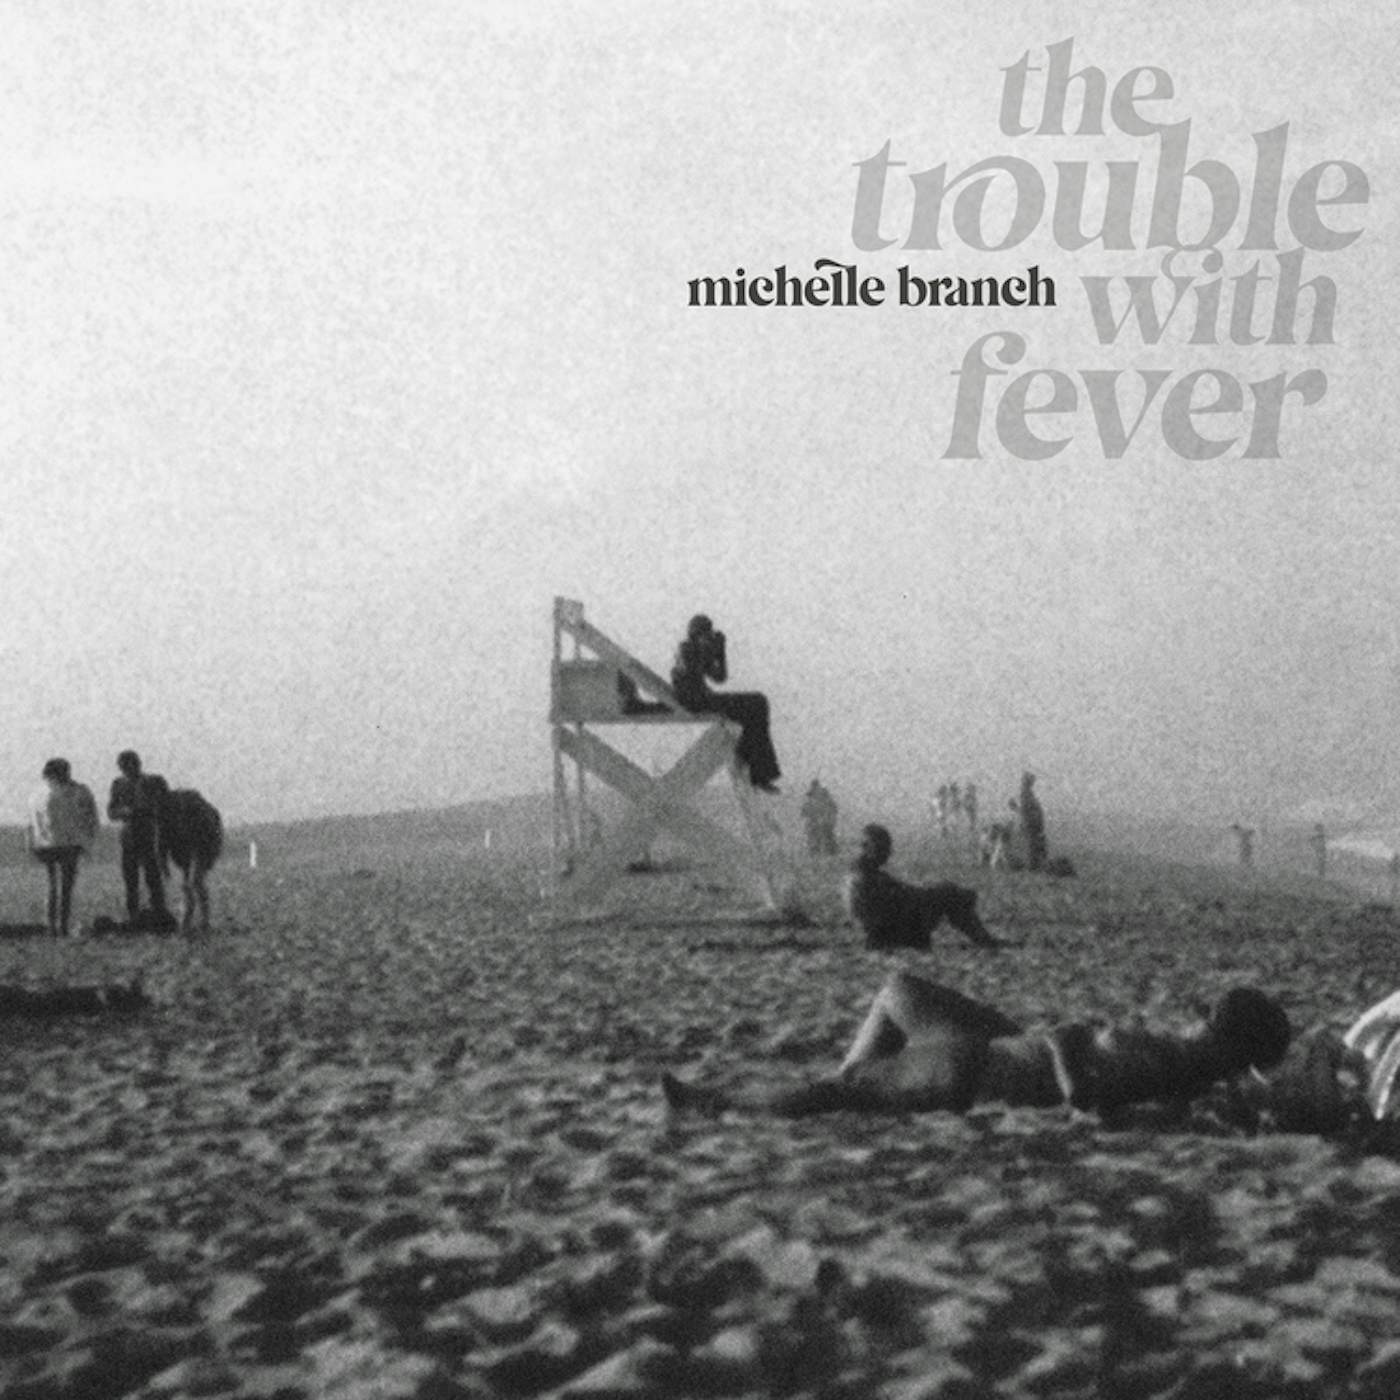 Michelle Branch The Trouble With Fever CD